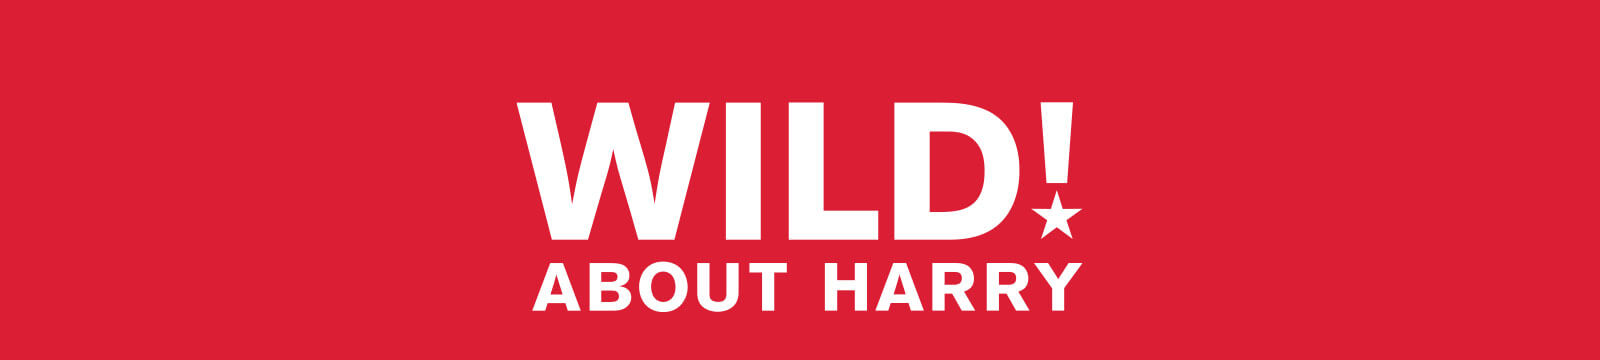 Wild about Harry!